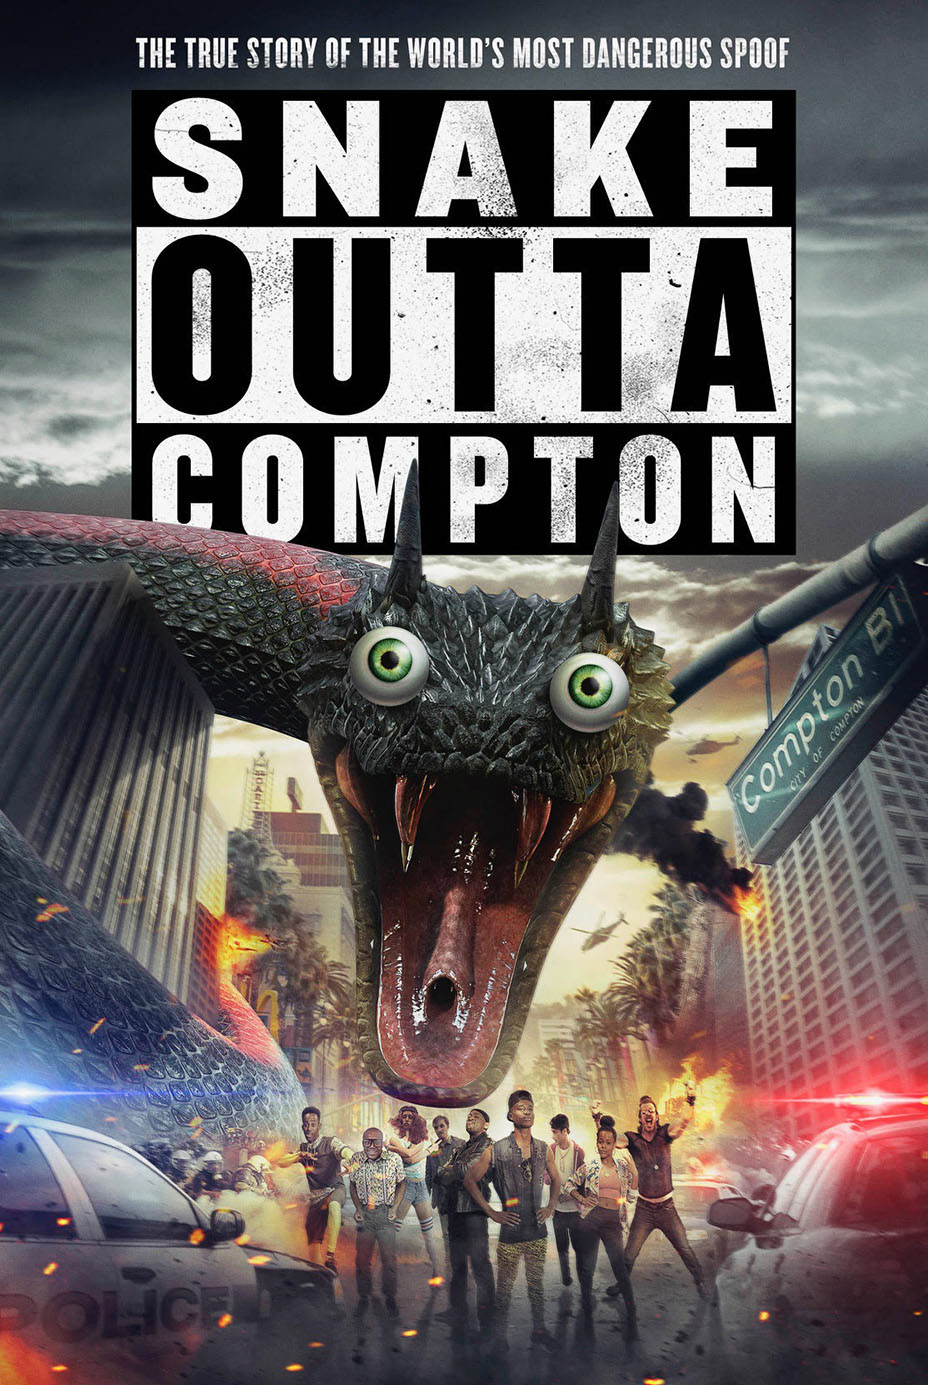 The Ridiculous Trailer For Snake Outta Compton Is The Craziest Thing You’ll See All Day